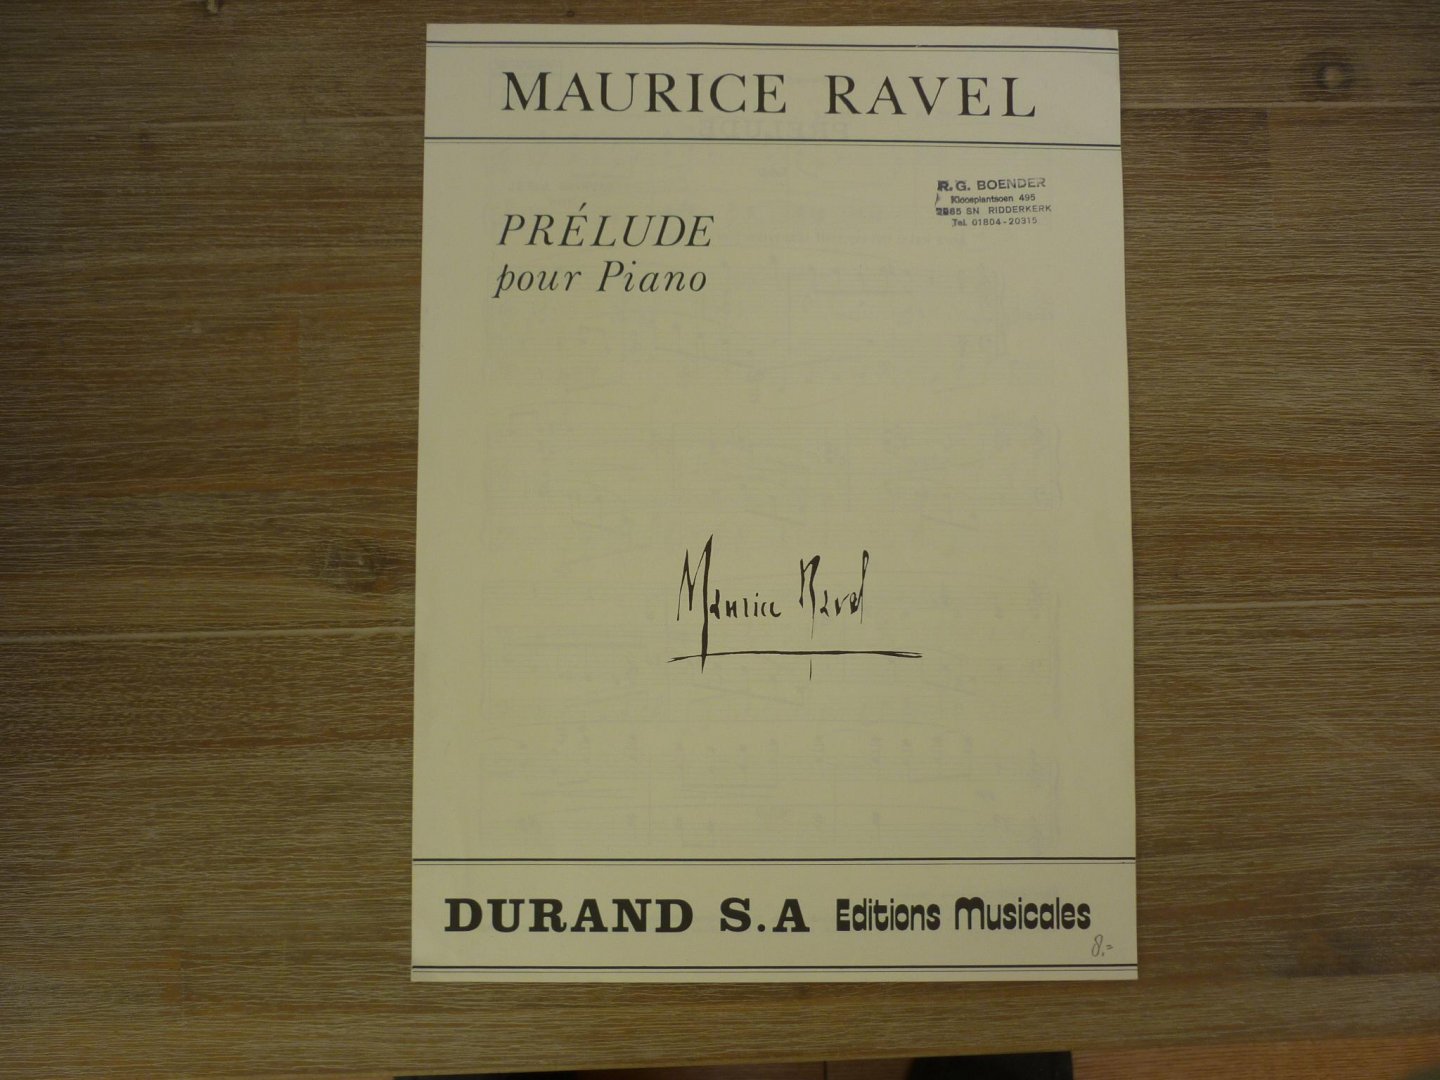 Ravel; Maurice - Prelude pour Piano